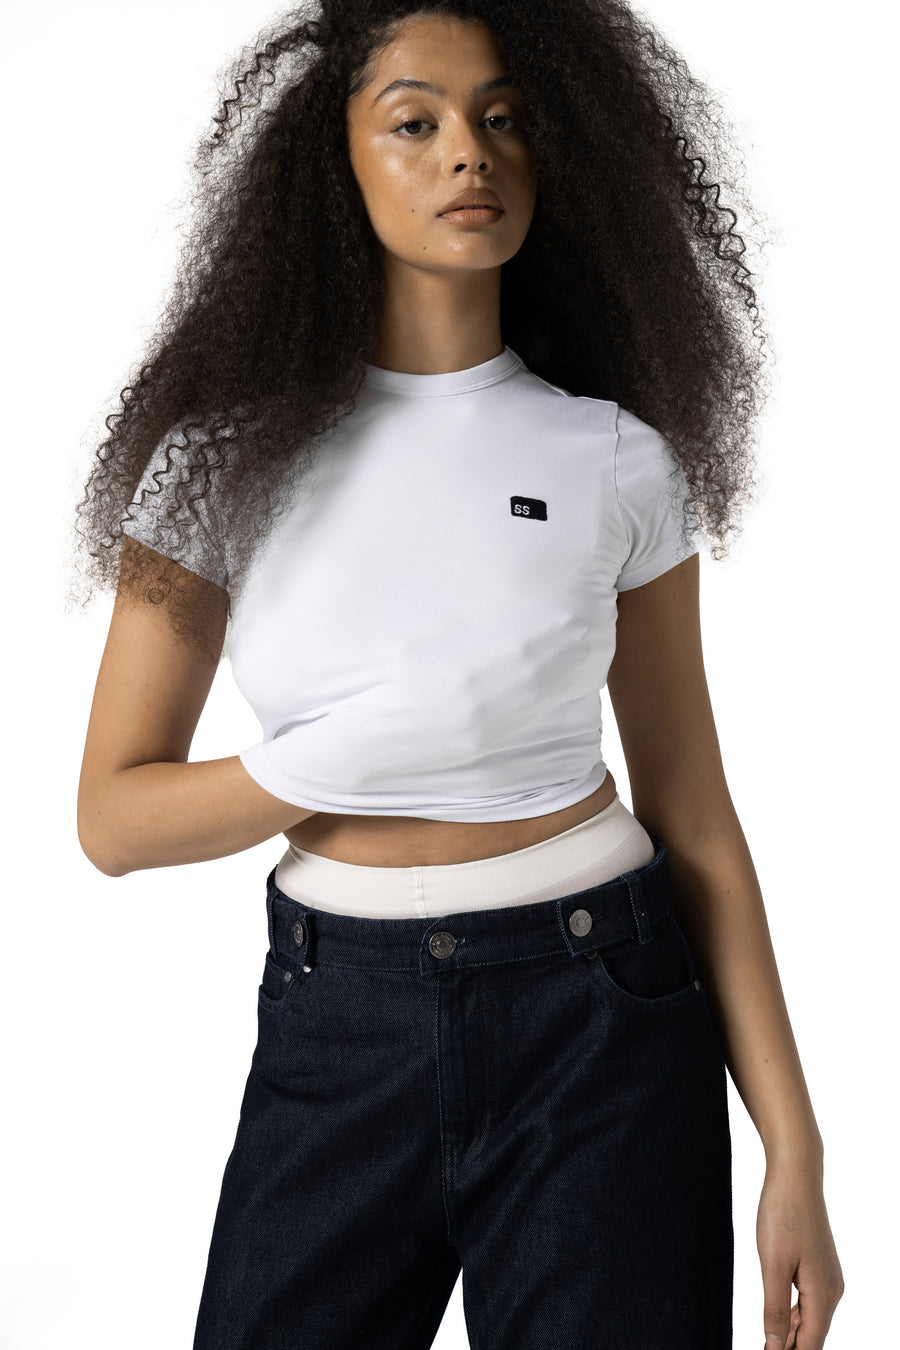 Basic Baby Top in White